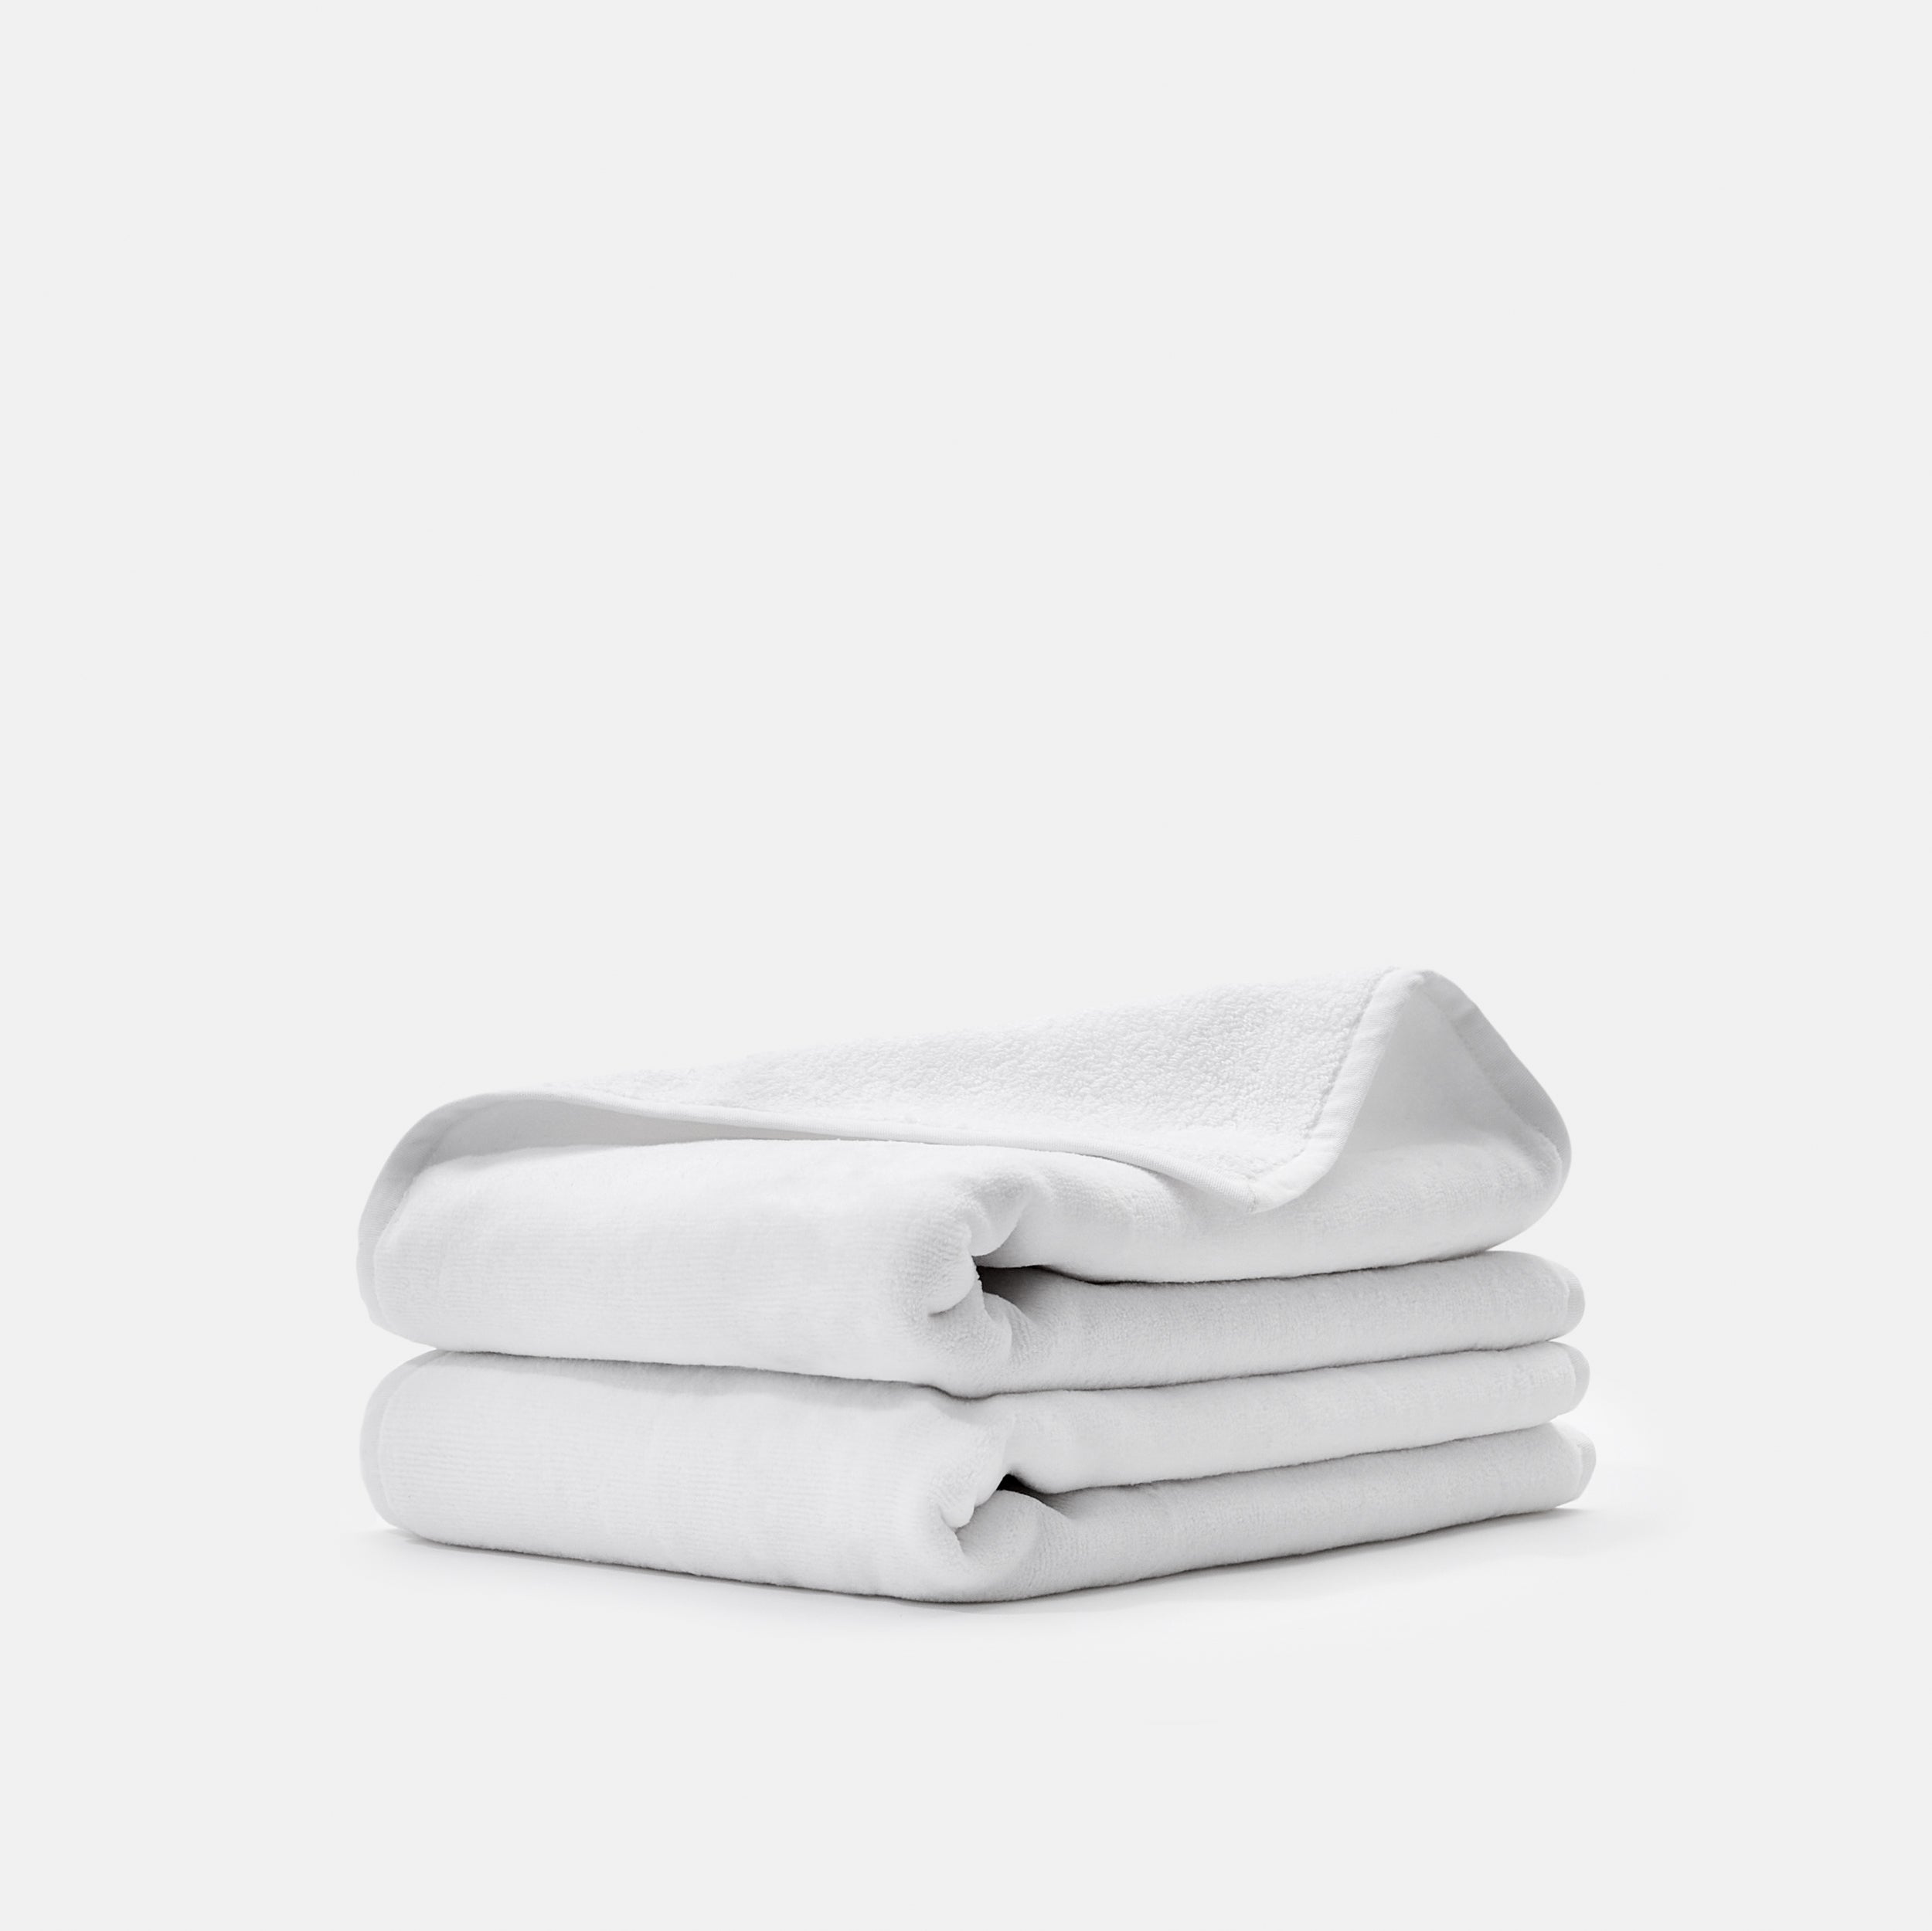 Beach House Terry / Hand Towels 20" x 30" / PROSSIONI® White